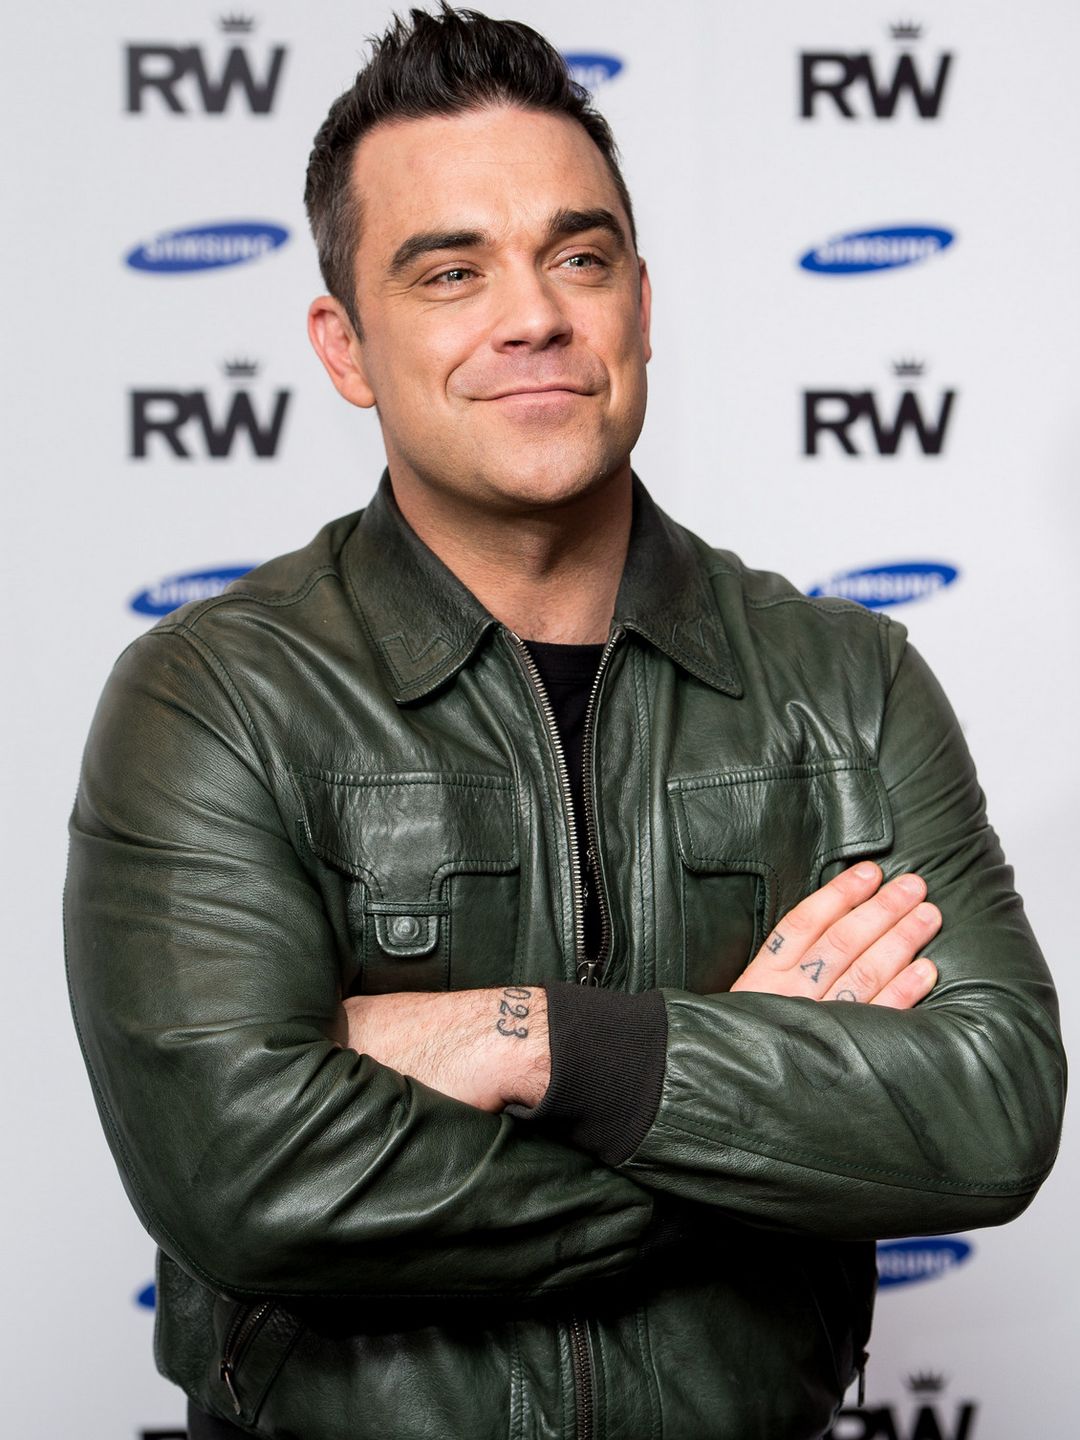 Robbie Williams young pics